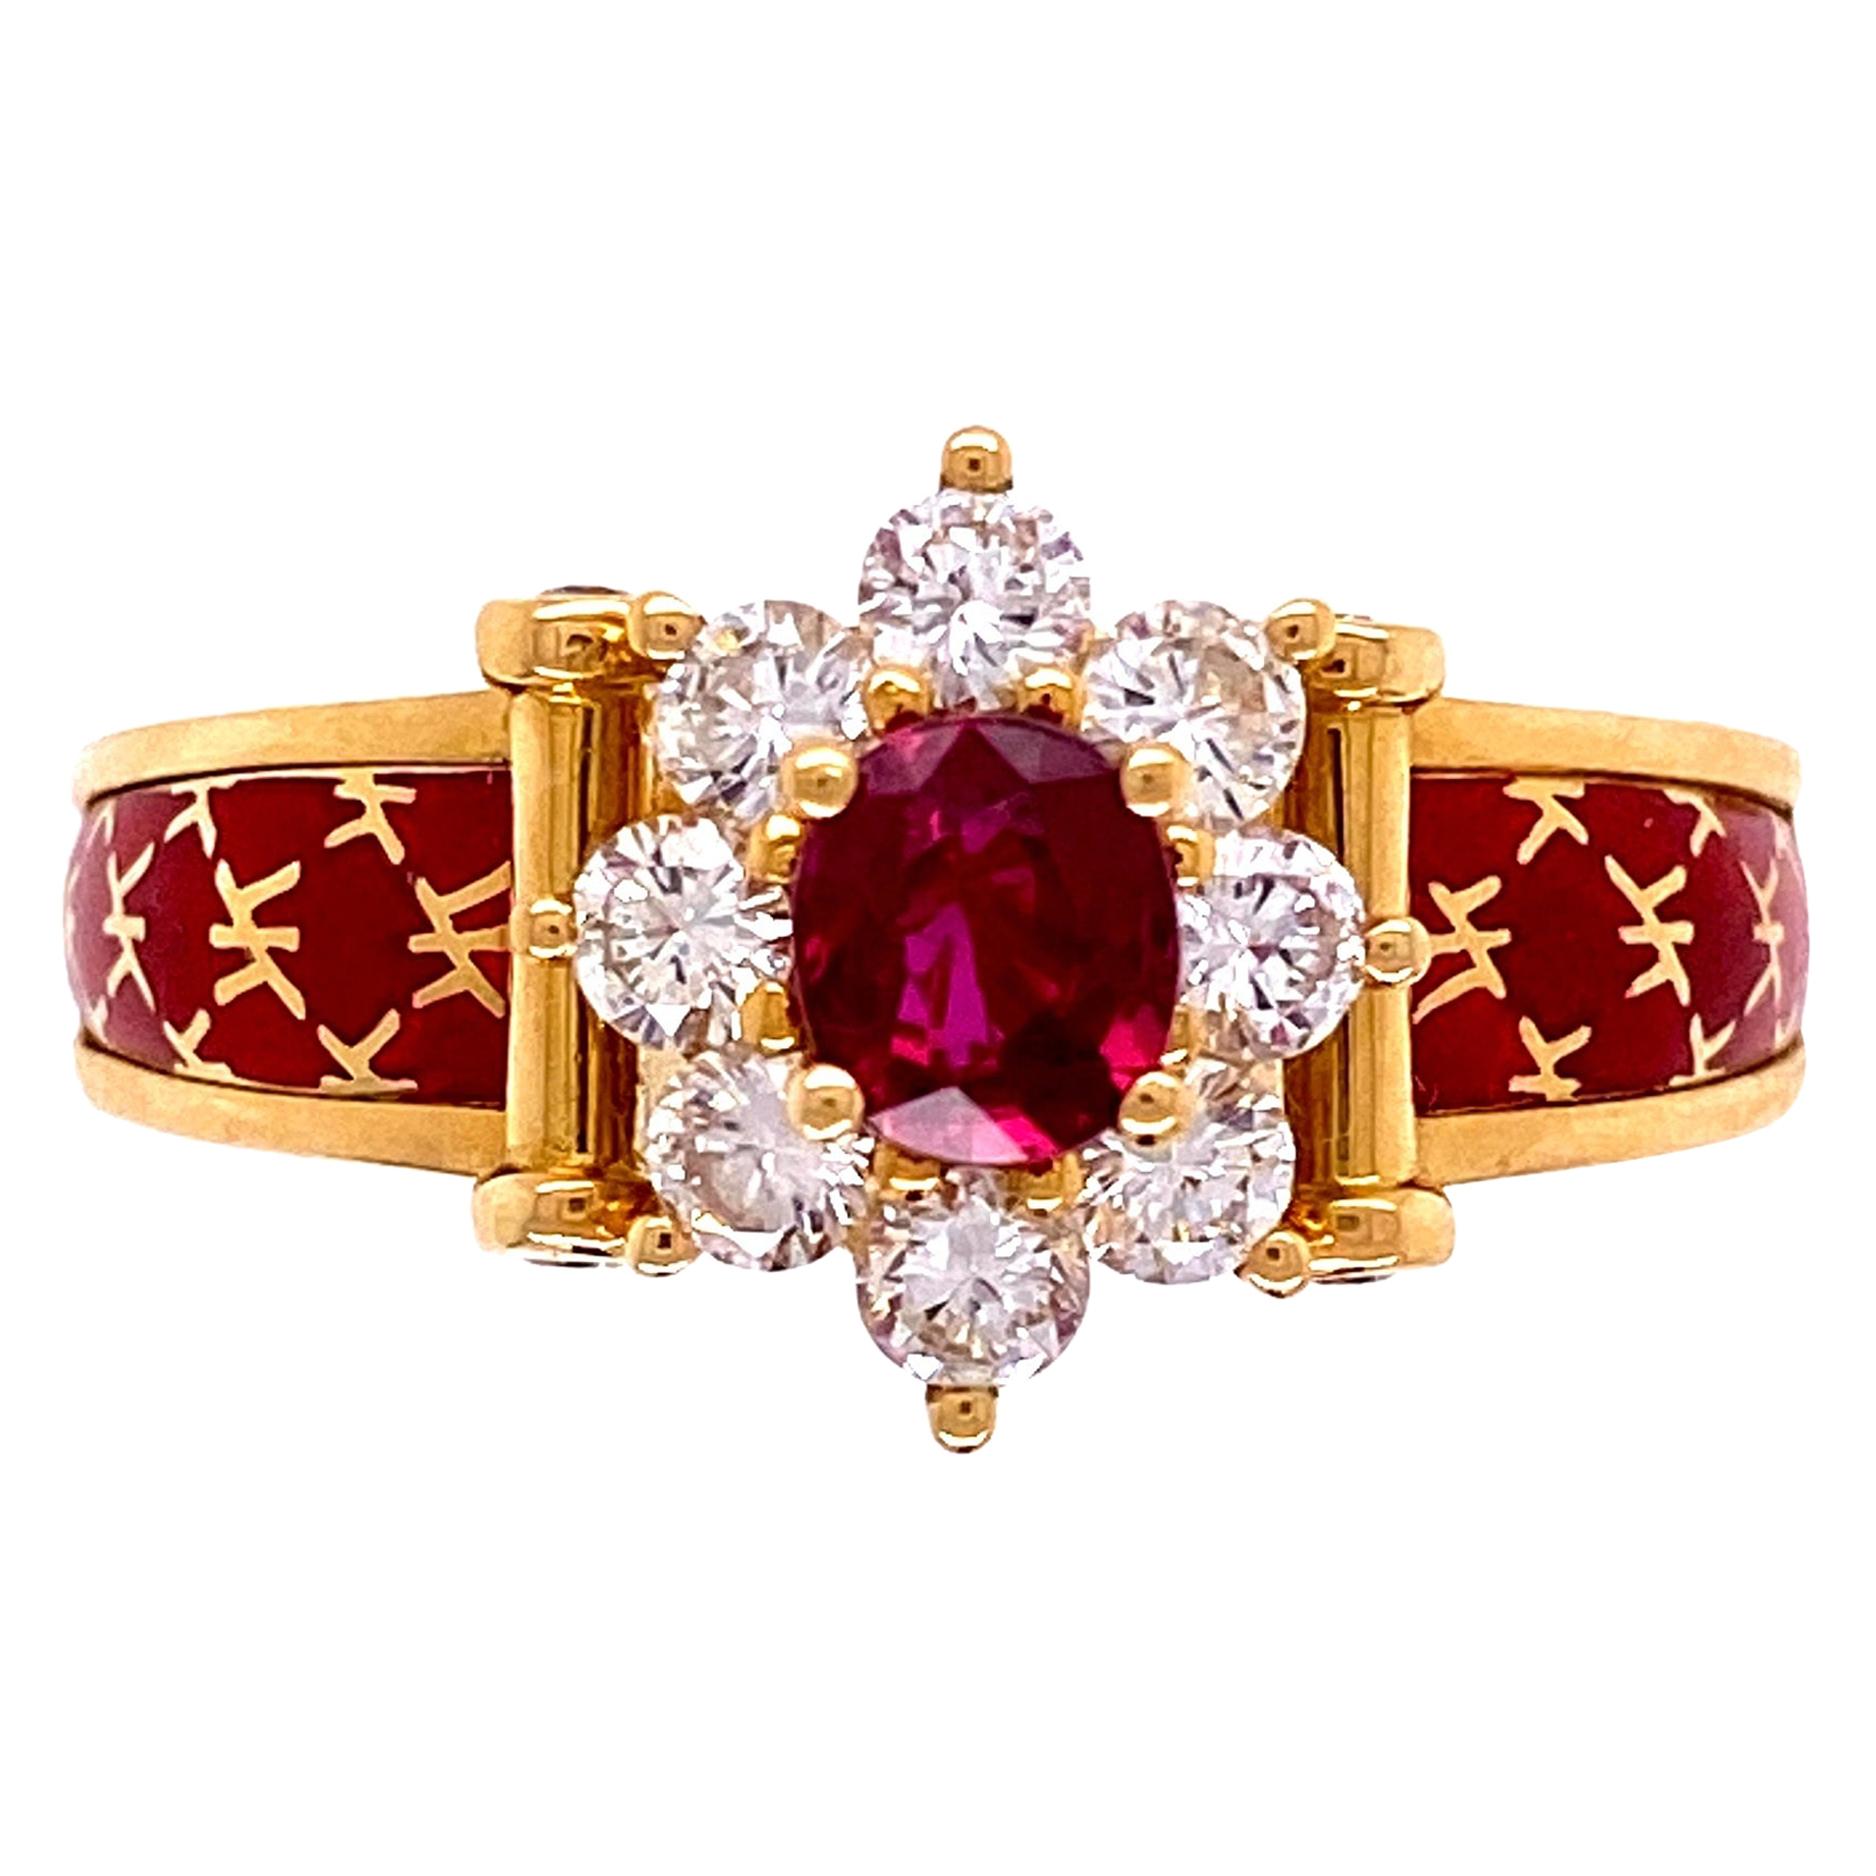 Vintage Ruby and Diamond Red Enamel Gold Ring France Fine Estate Jewelry